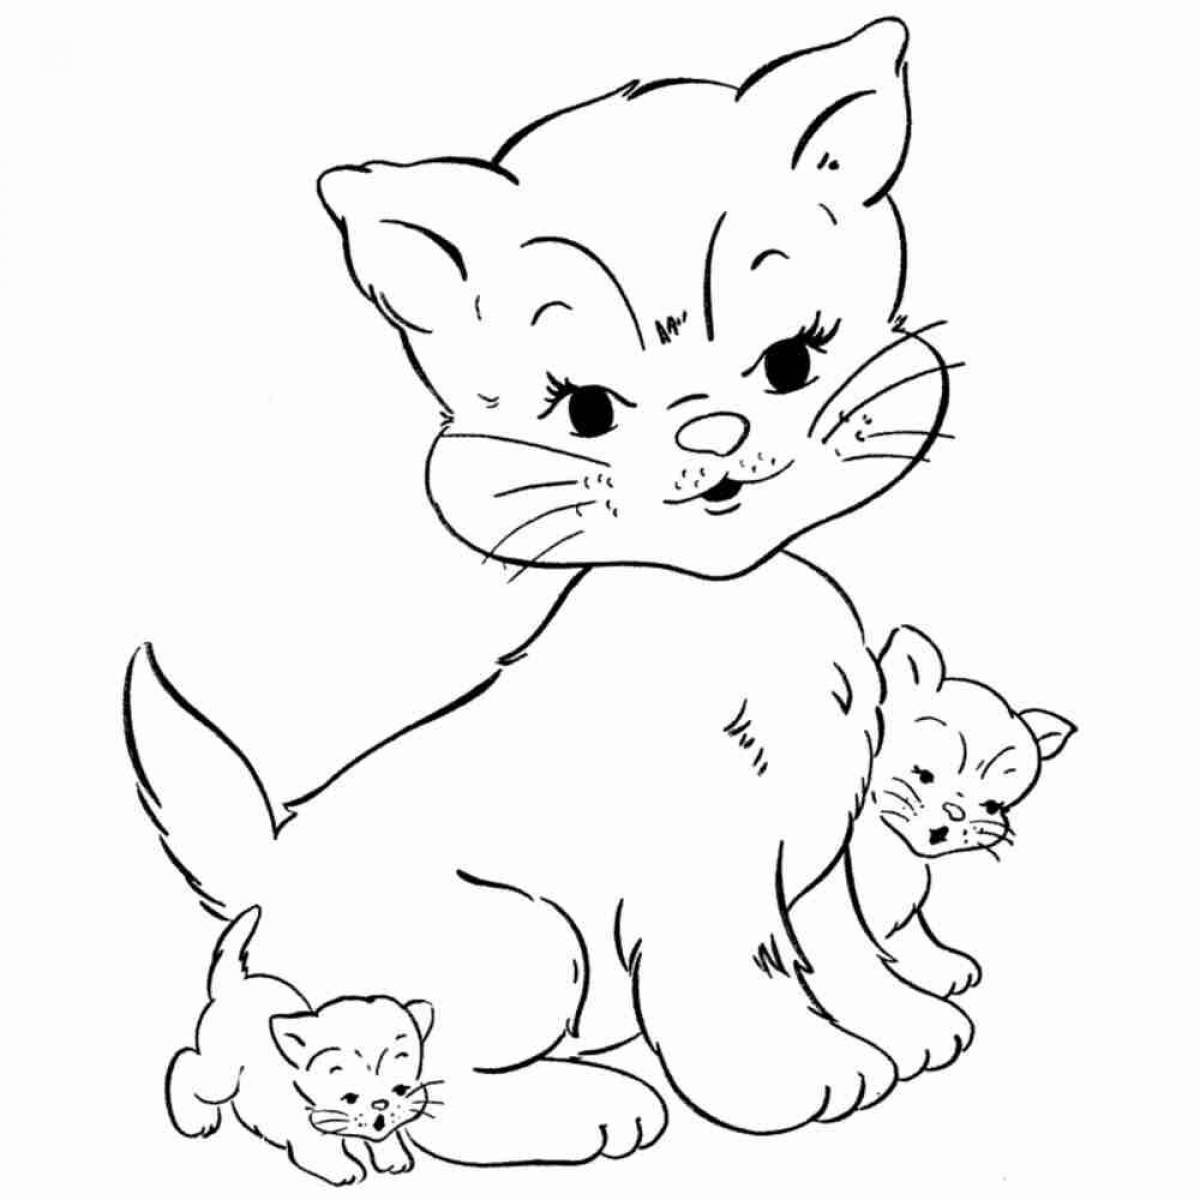 Coloring playful kitten for kids